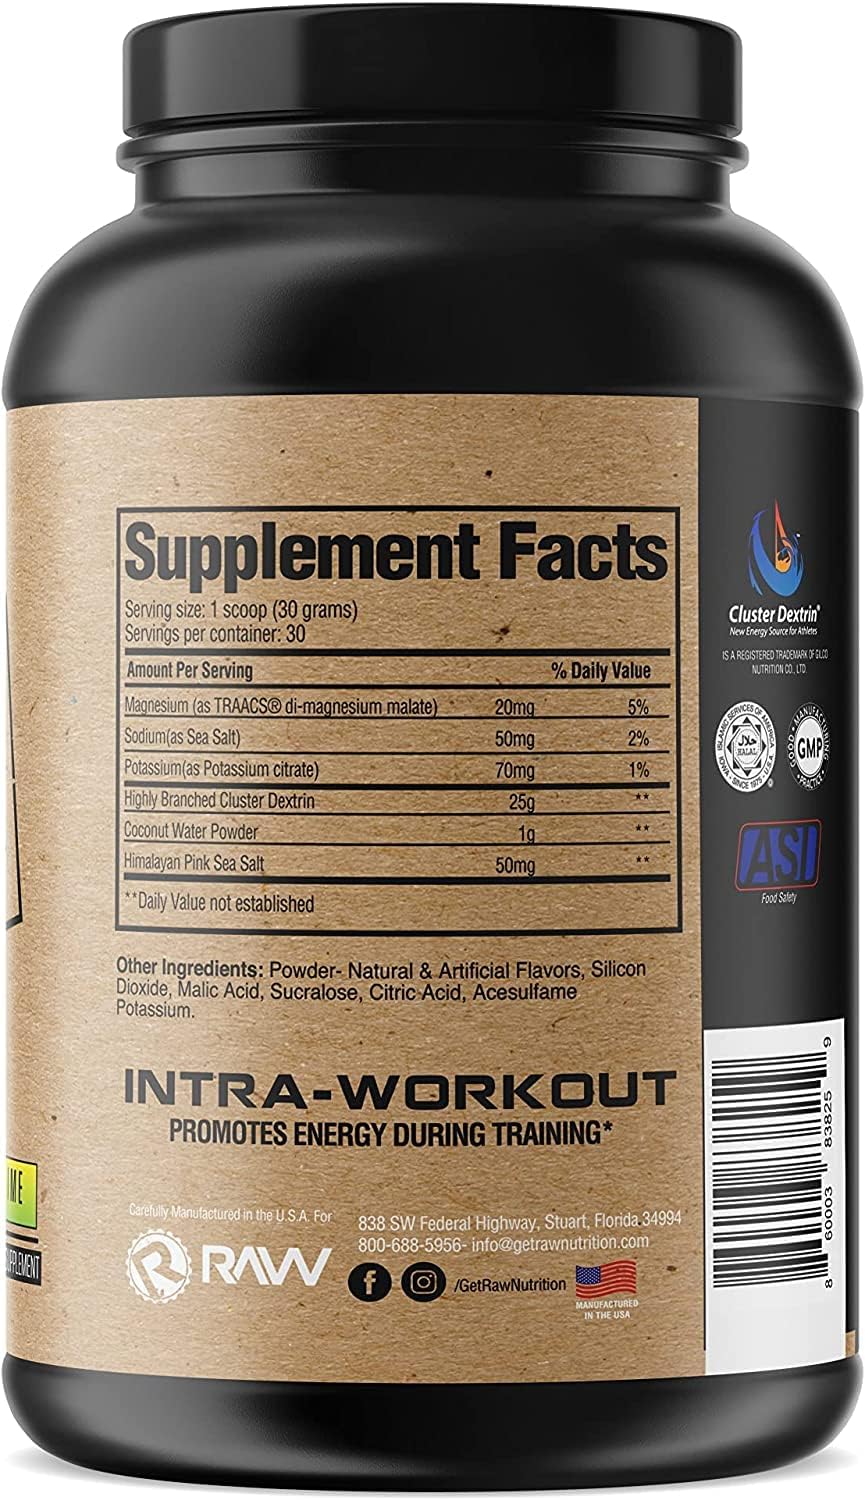 RAW Intra Workout Supplement Powder, Lemon Lime - Intra Supplement for Hydration, Mental Focus, Energy, & Workout Recovery - Intra Workout Powder That Increases Performance & Endurance - 30 Servings : Health & Household